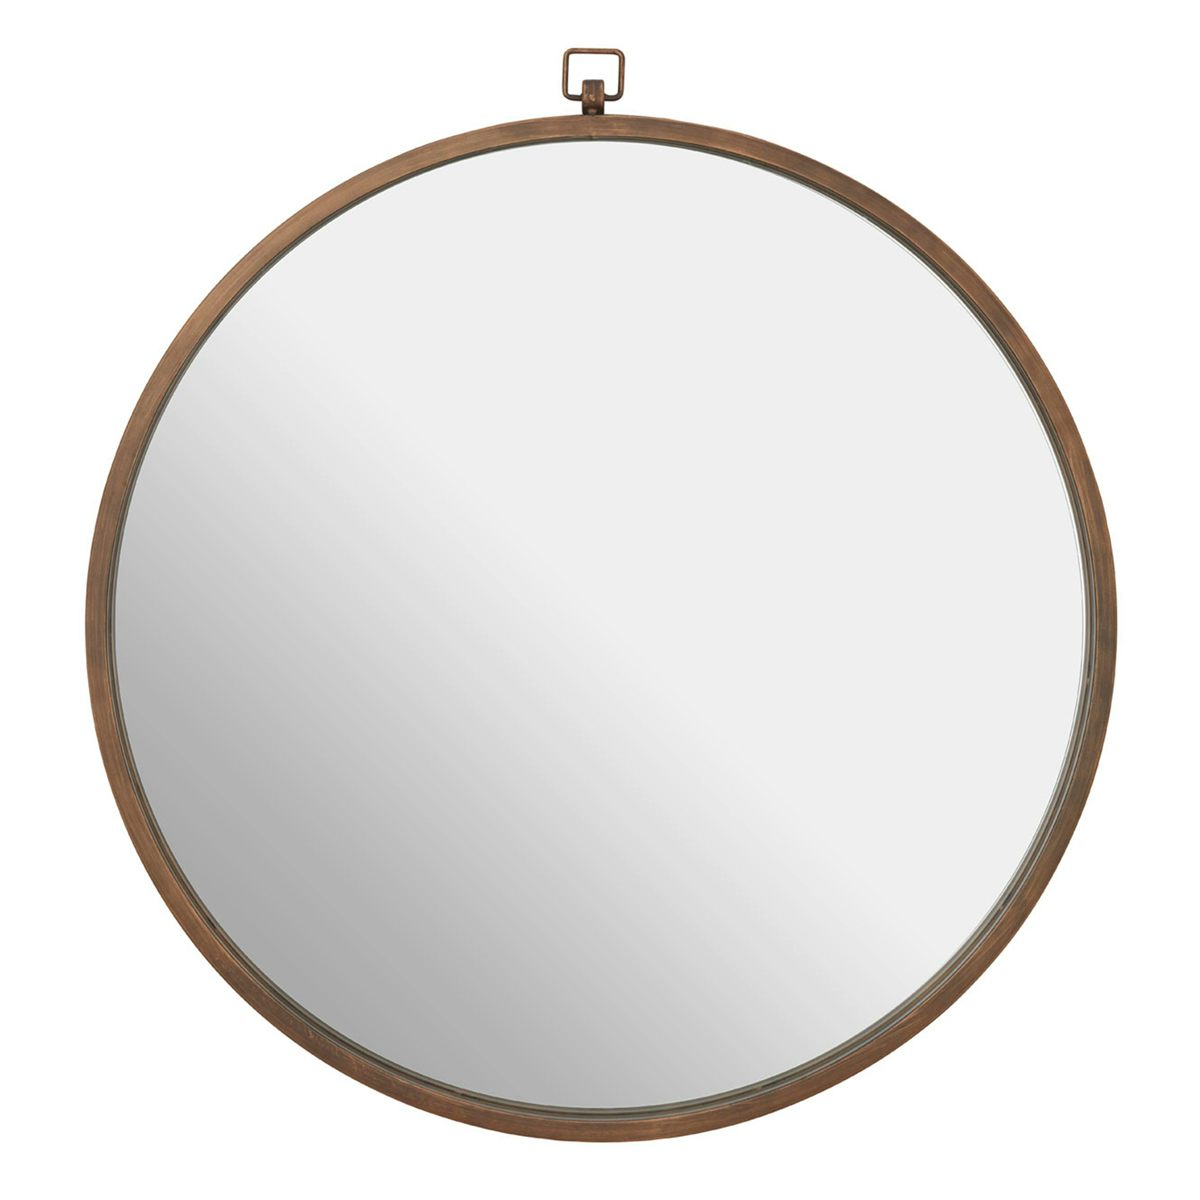 Accents Jacen round wall mirror with bronze frame